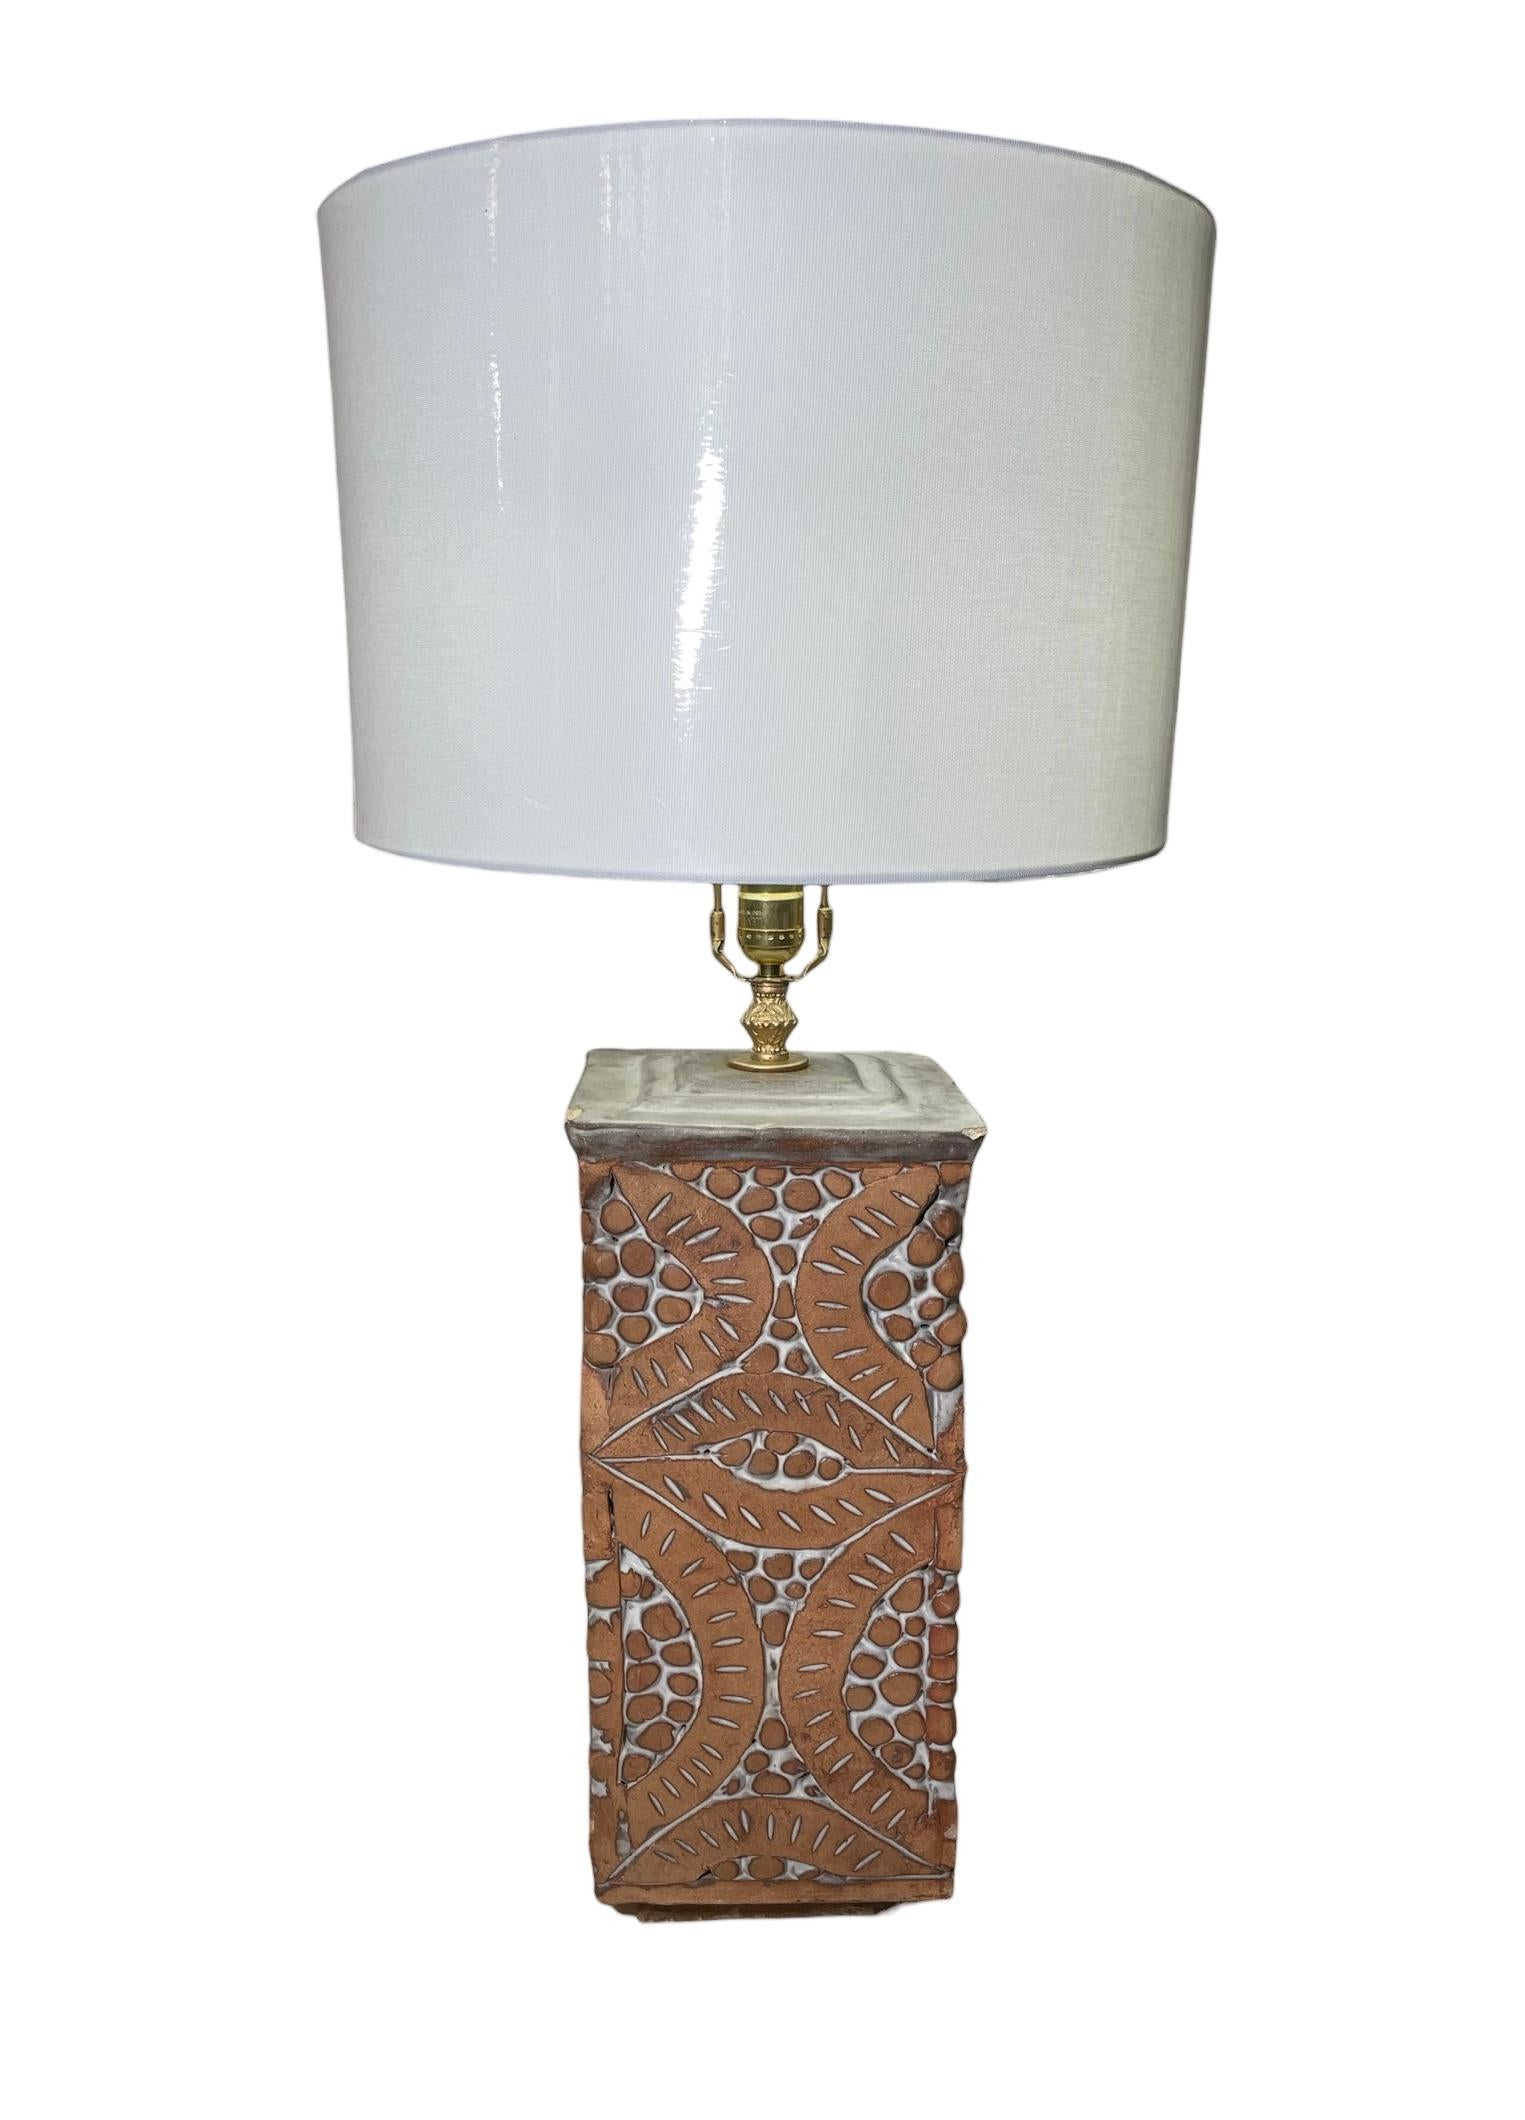 This is an Isla Del Sol Stoneware Lamp. It depicts a table lamp with a rectangular stoneware base decorated with a relief pattern of brick color leaves and folded leaves. The center of the leaves are adorned with a relief of asymmetrical brick color